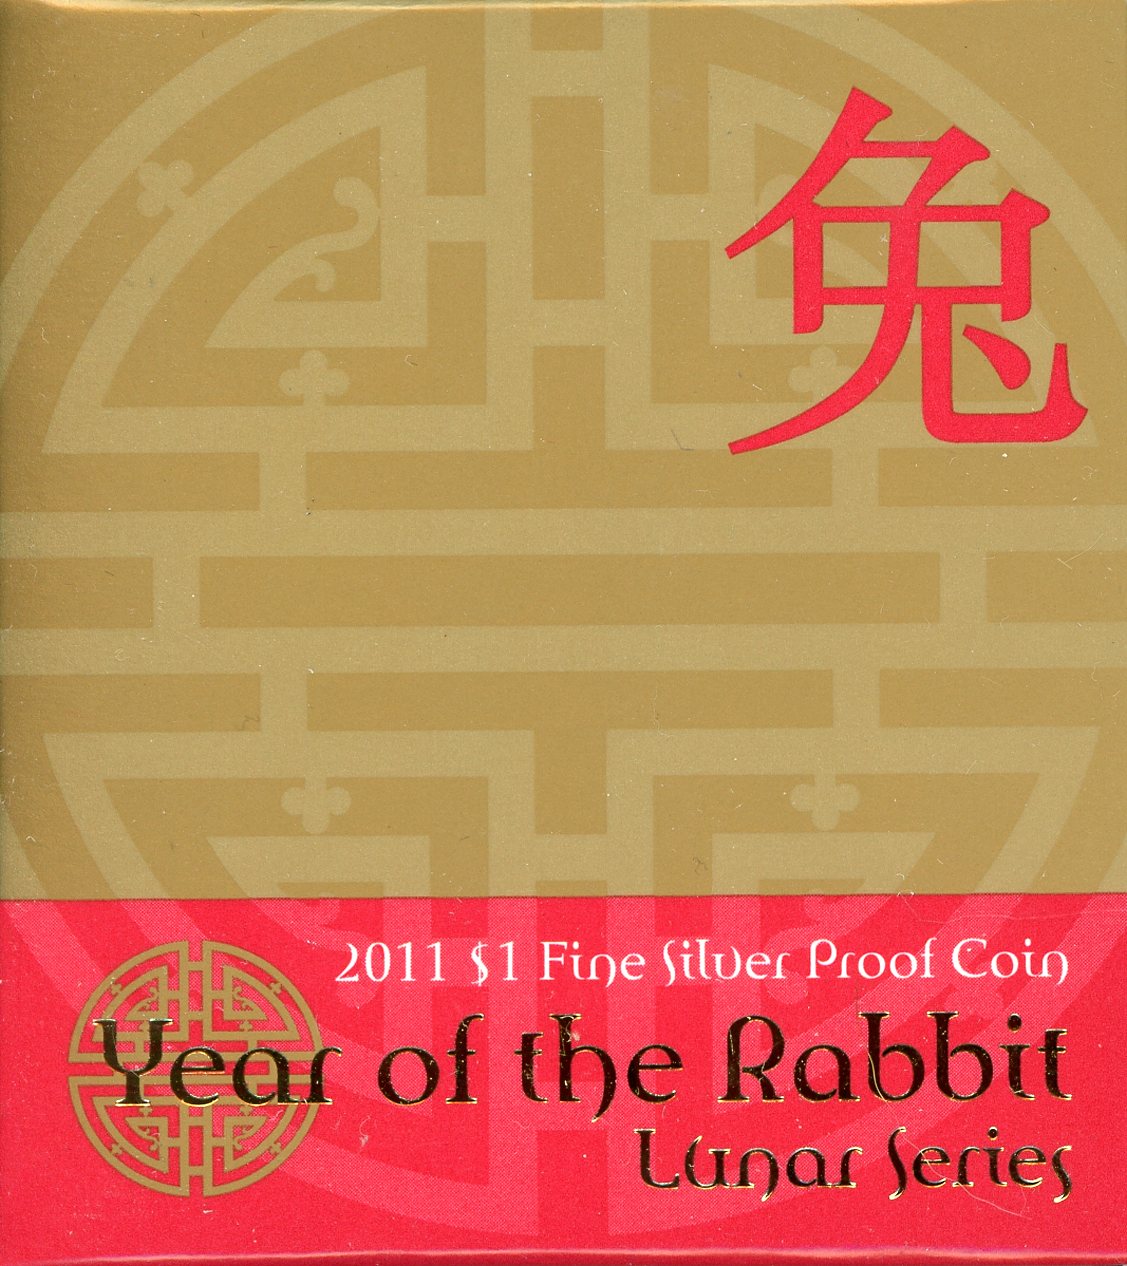 Thumbnail for 2011 Lunar Series - Year of the Rabbit $1 Silver Proof Coin